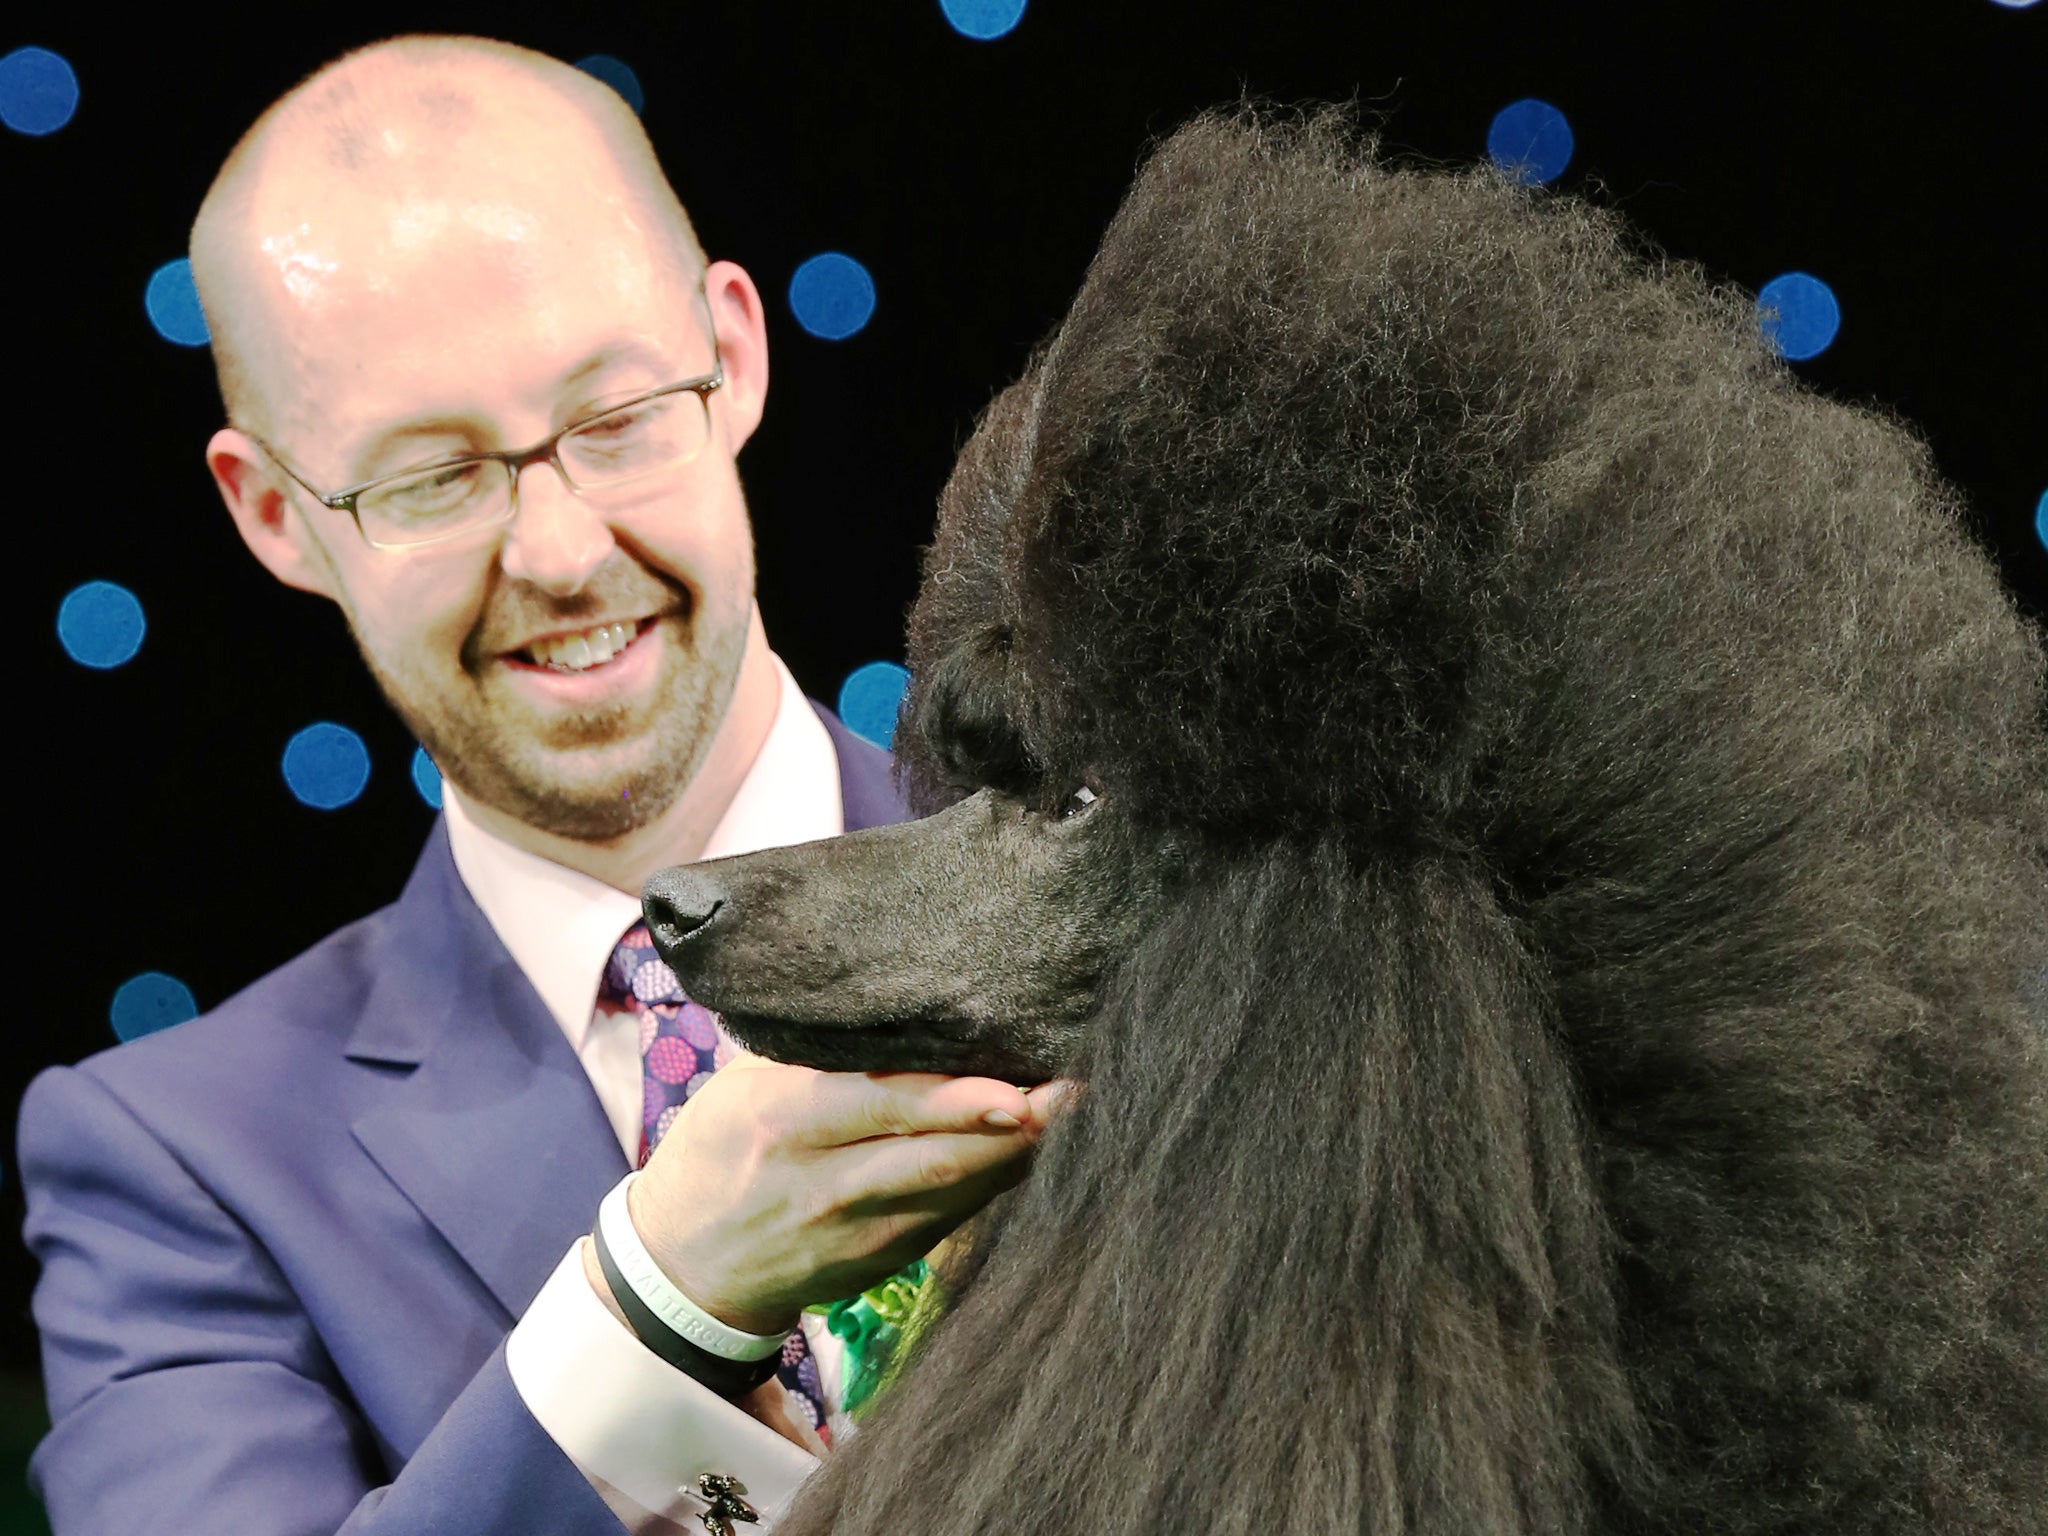 Jason Lynn with Ricky the Standard Poodle, as they celebrate winning the Best in Show category of Crufts during the final day at Crufts Dog Show on 9 March 2014 in Birmingham, England